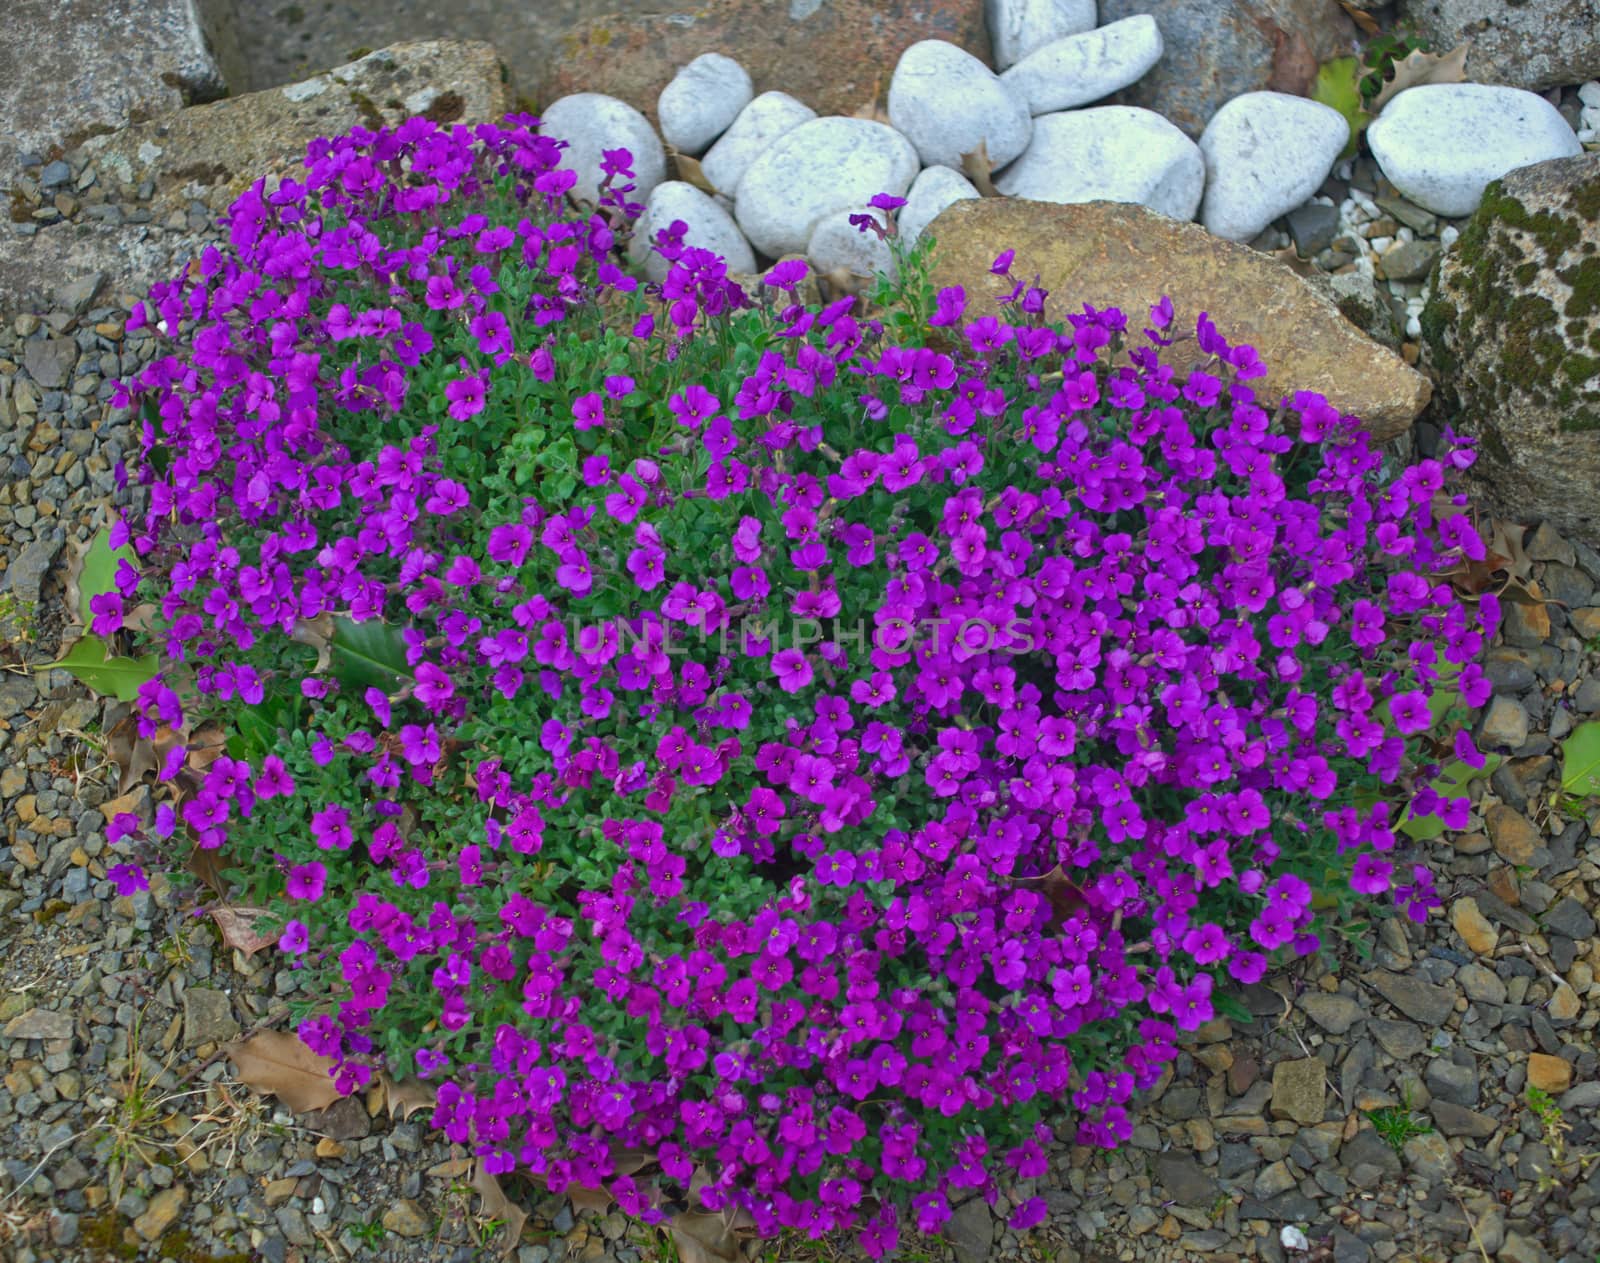 Plant blooming with small violet flowers on stone wall